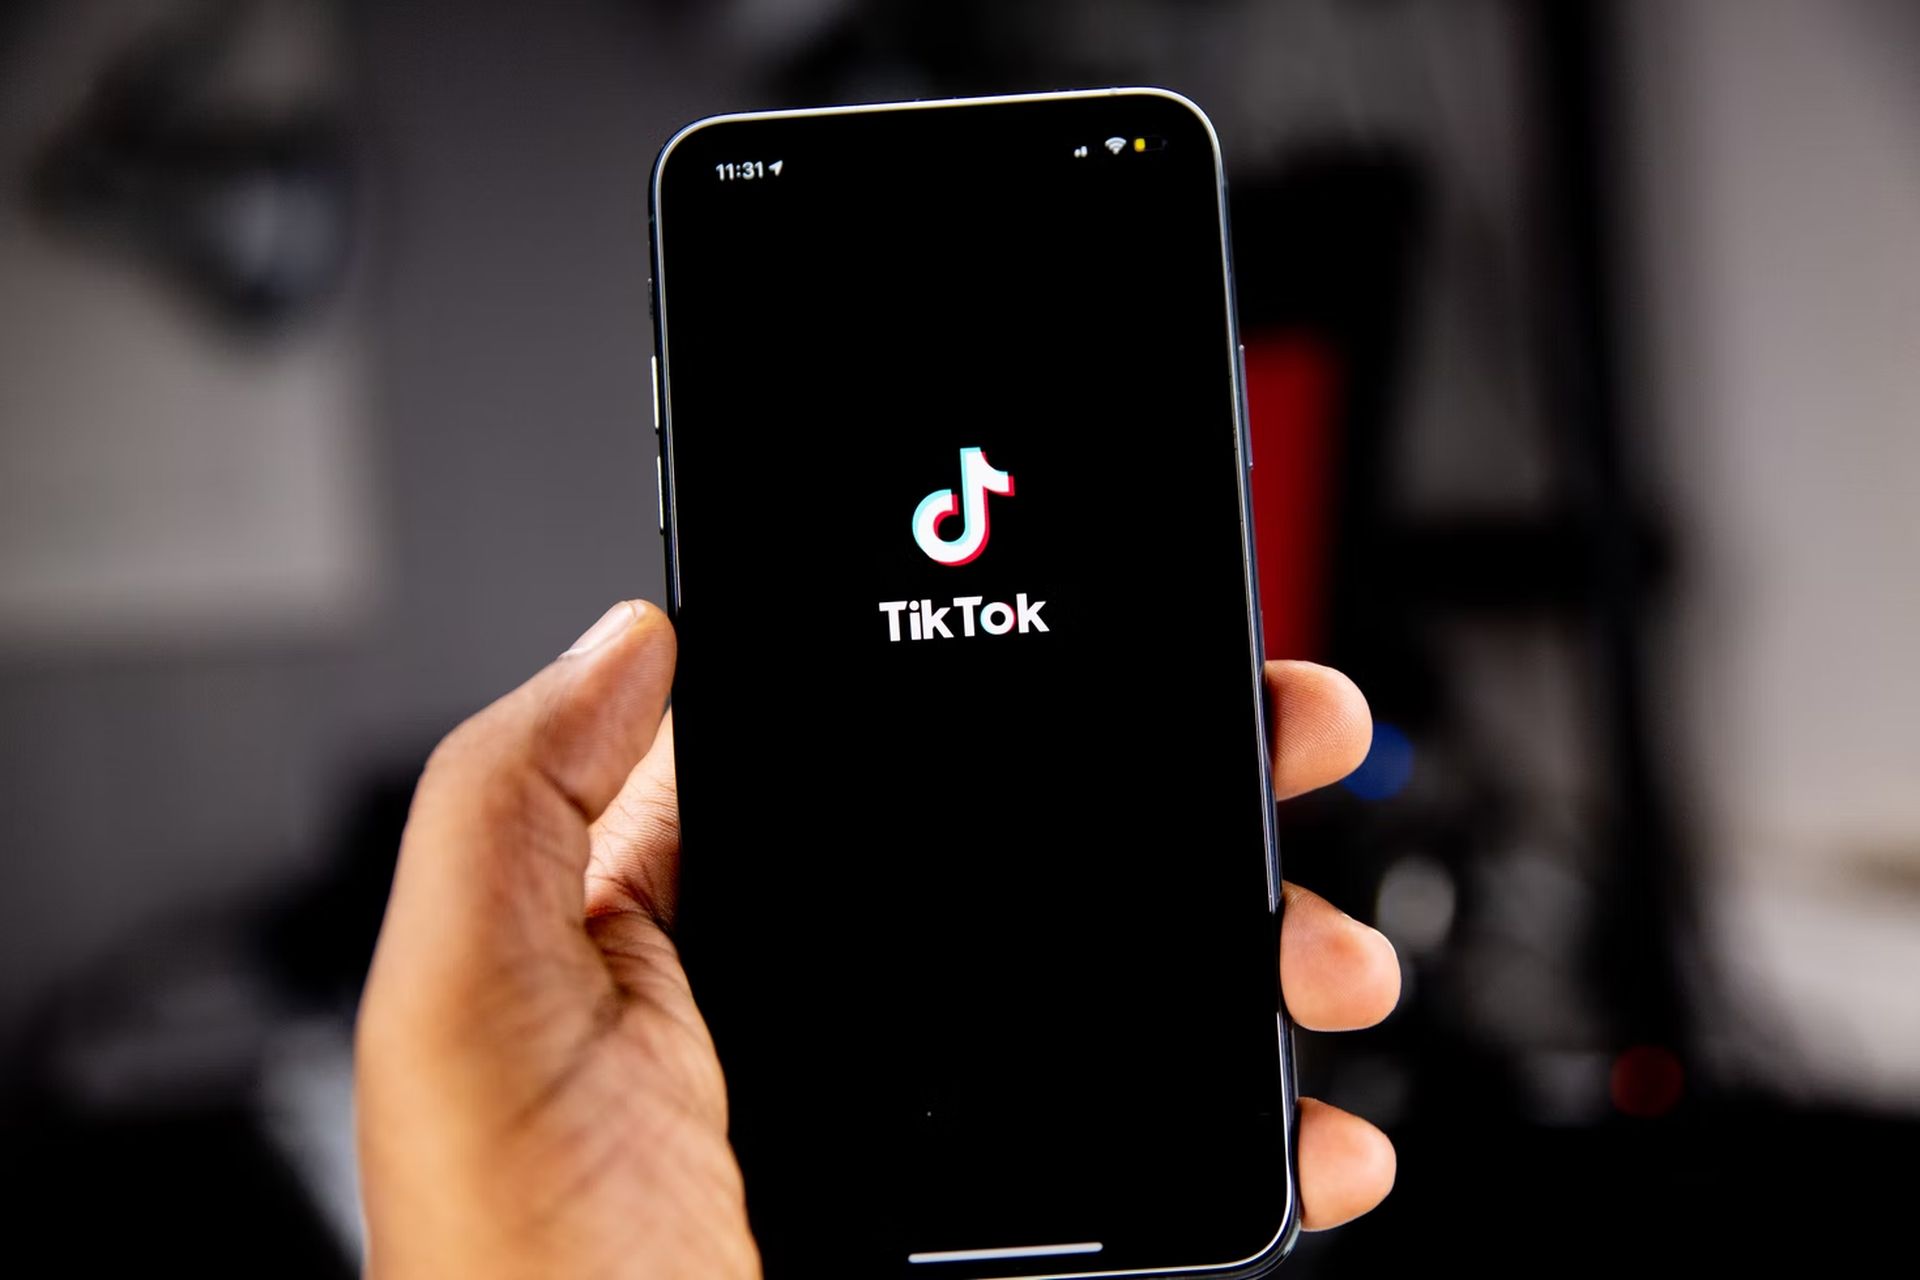 Today we are here to explain what TikTok Kia challenge is and show you how to report these dangerous videos on TikTok.